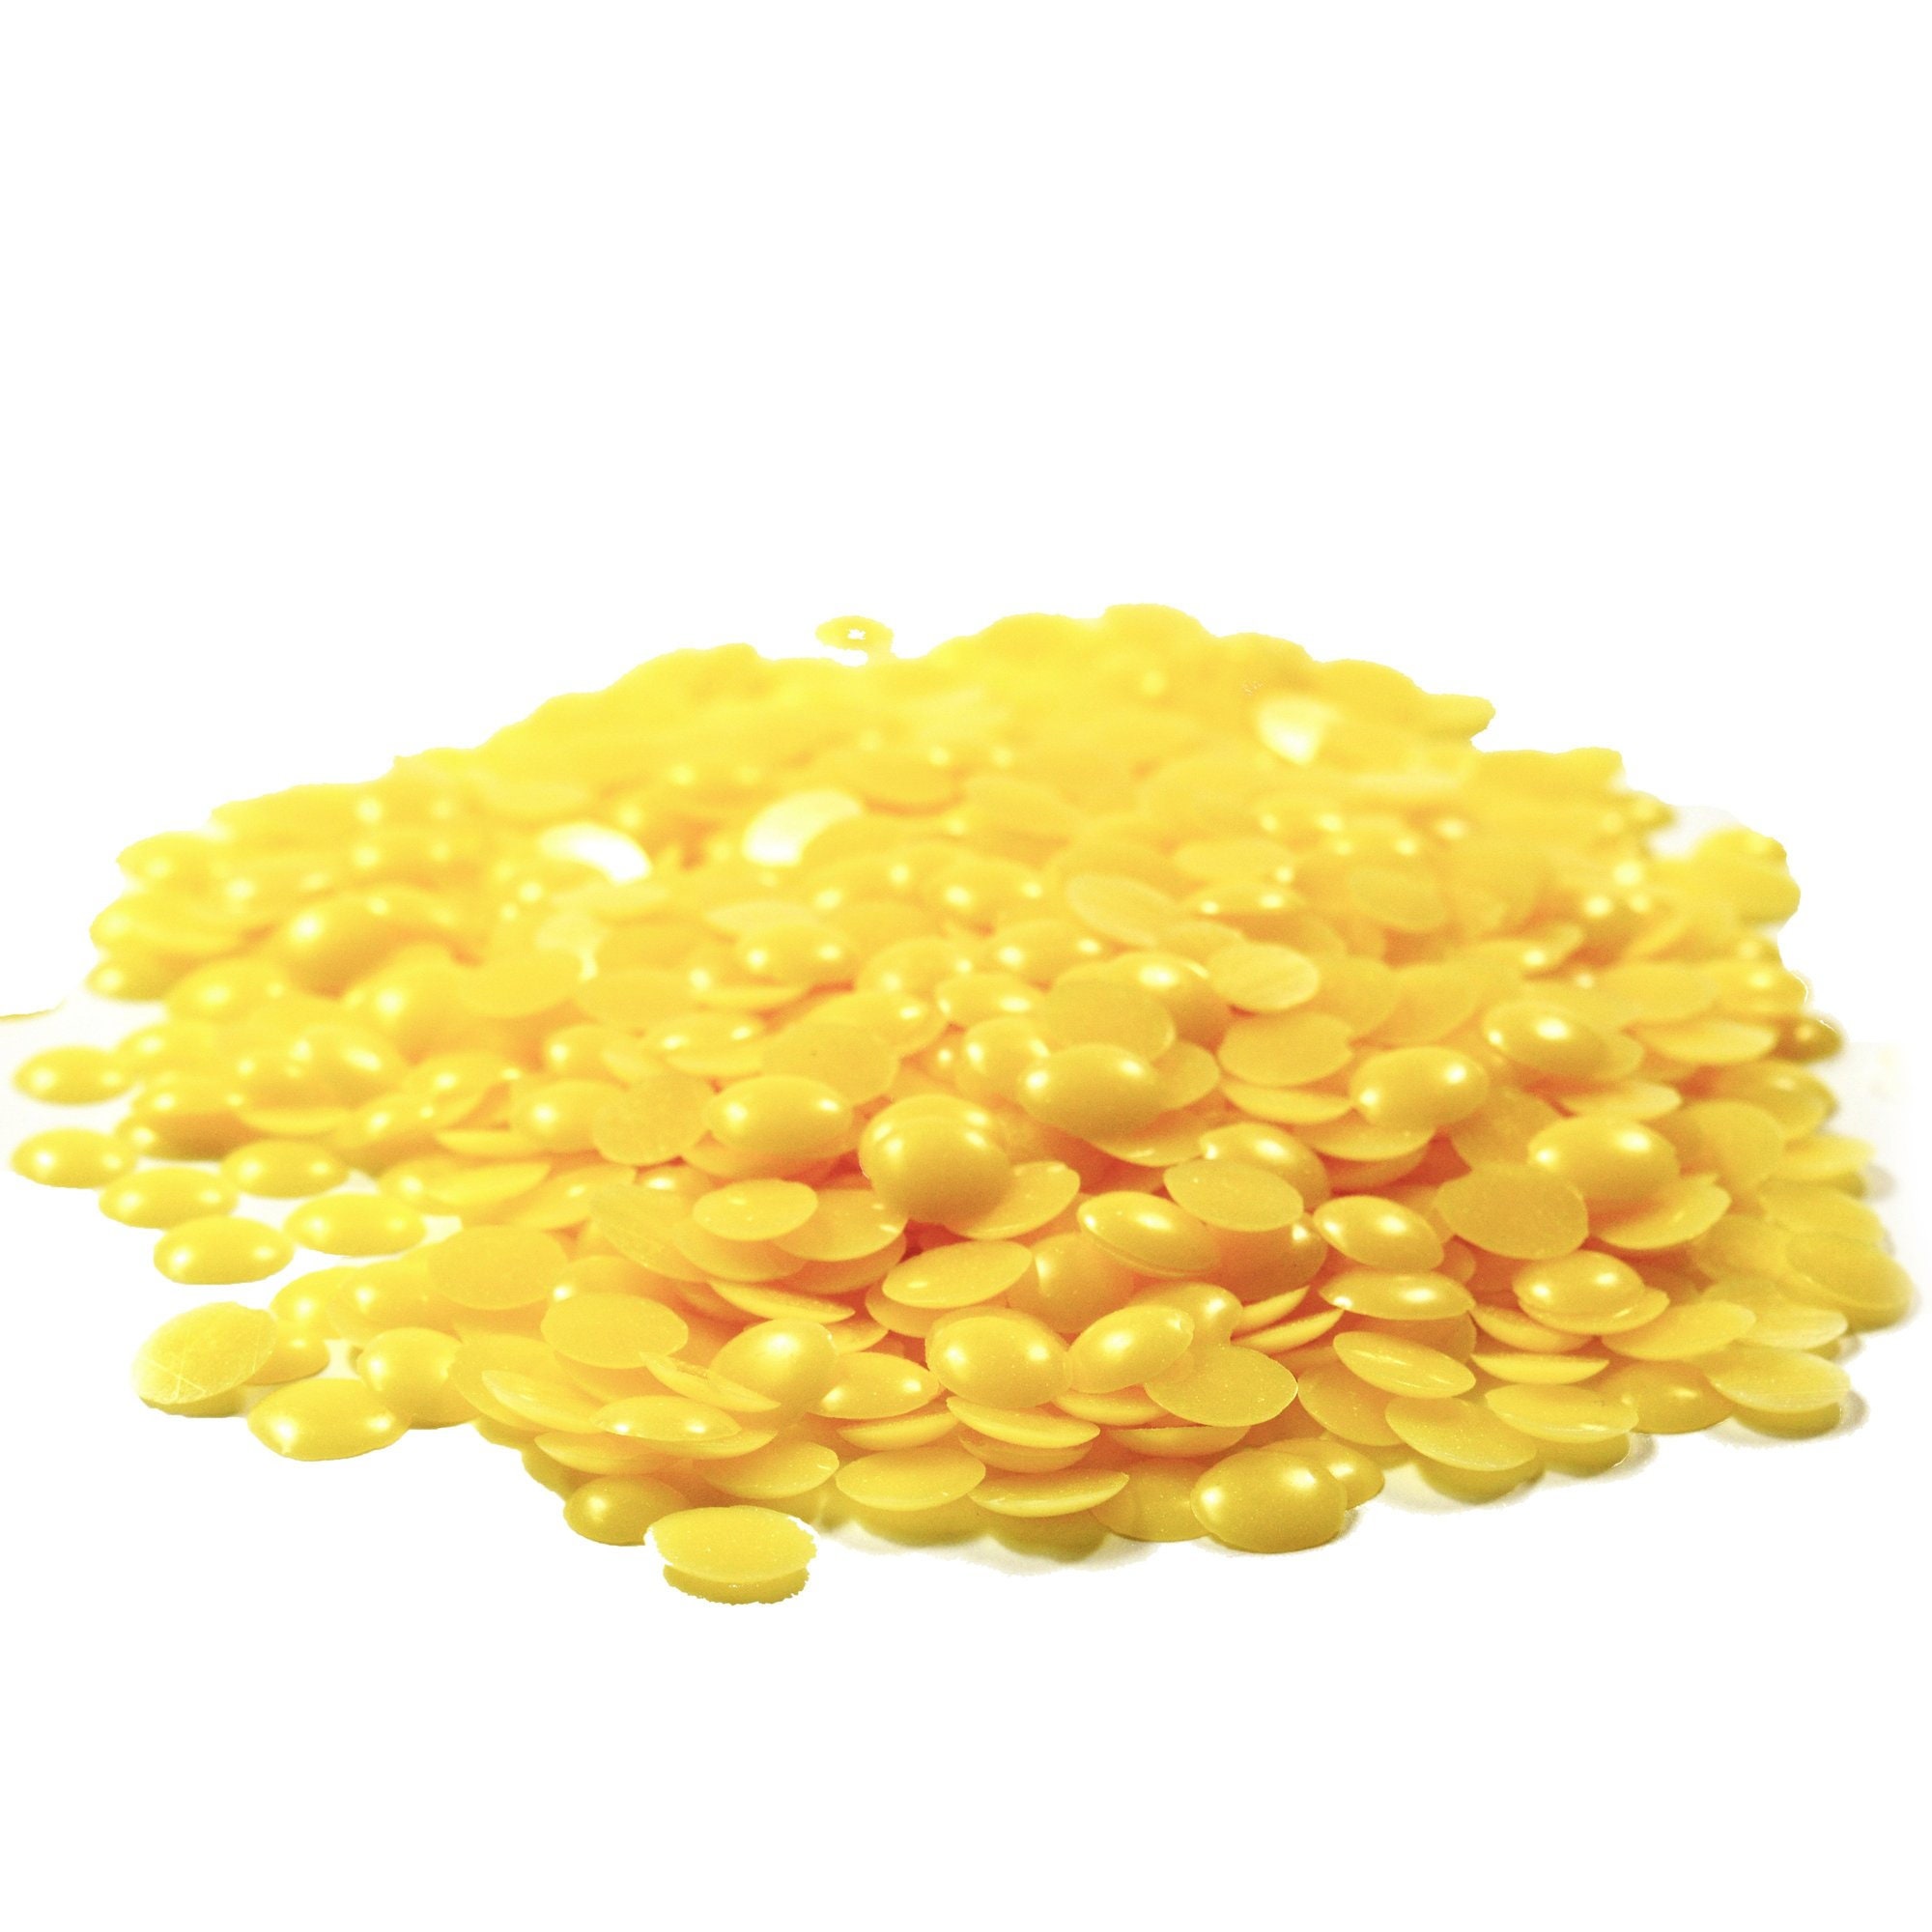 CoolCrafts Candelilla Wax Pellets Candelilla Vegan Wax for Cosmetics DIY, Soap and Candle Making, Alternative to Beeswax - 14 oz